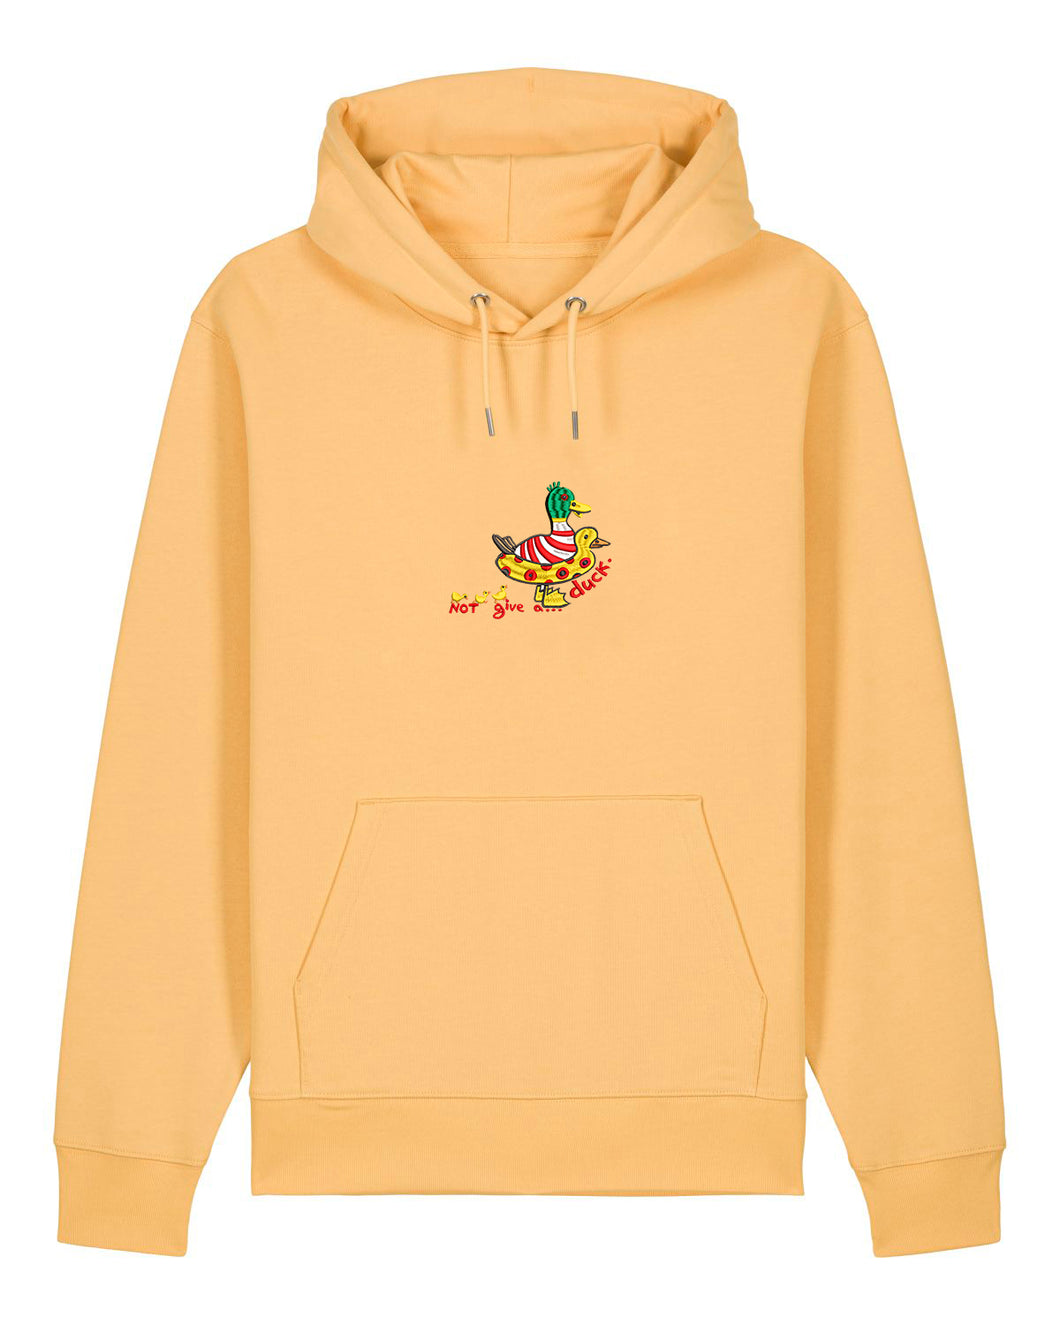 Not give a...duck.- Embroidered UNISEX hoodie